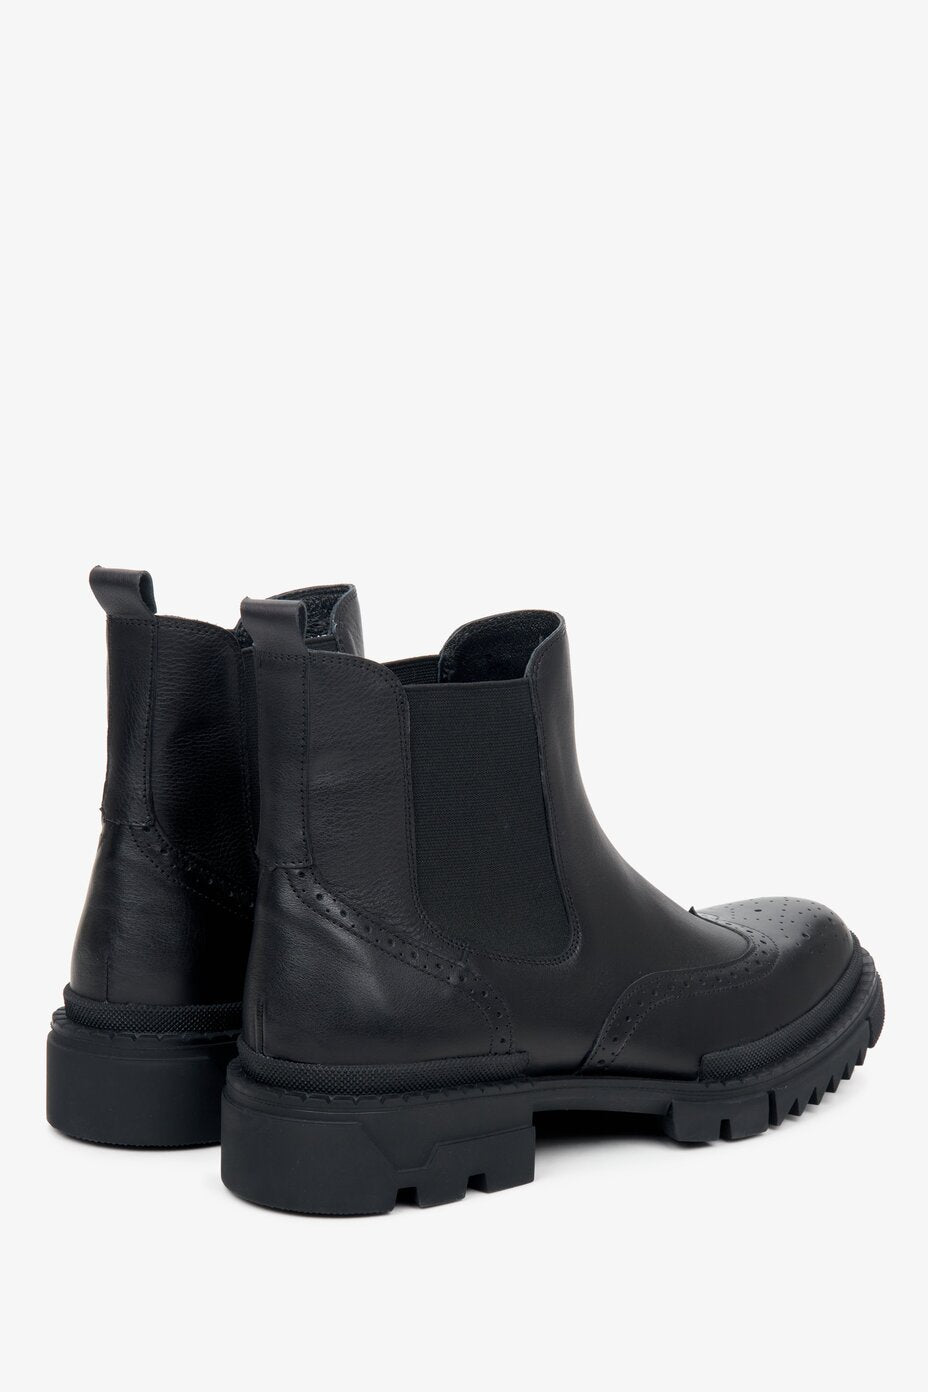 Men's black ankle boots for fall by Estro, made of natural leather - close-up on the side and rear of the boot.